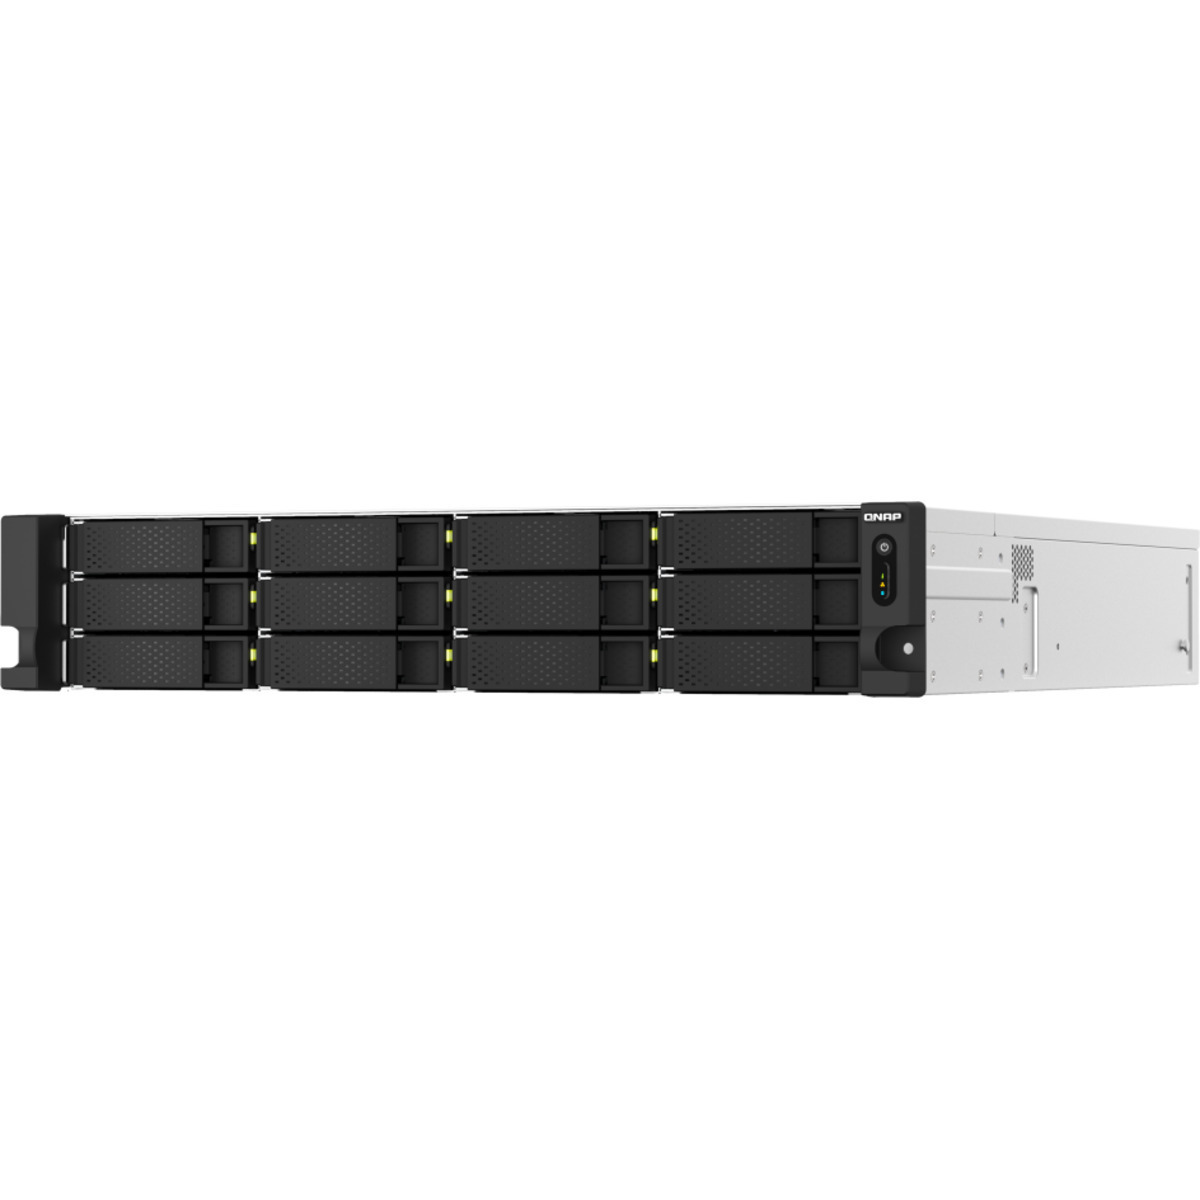 QNAP TS-h1887XU-RP E-2334 QuTS hero Edition RackMount 12+6-Bay Large Business / Enterprise NAS - Network Attached Storage Device Burn-In Tested Configurations TS-h1887XU-RP E-2334 QuTS hero Edition